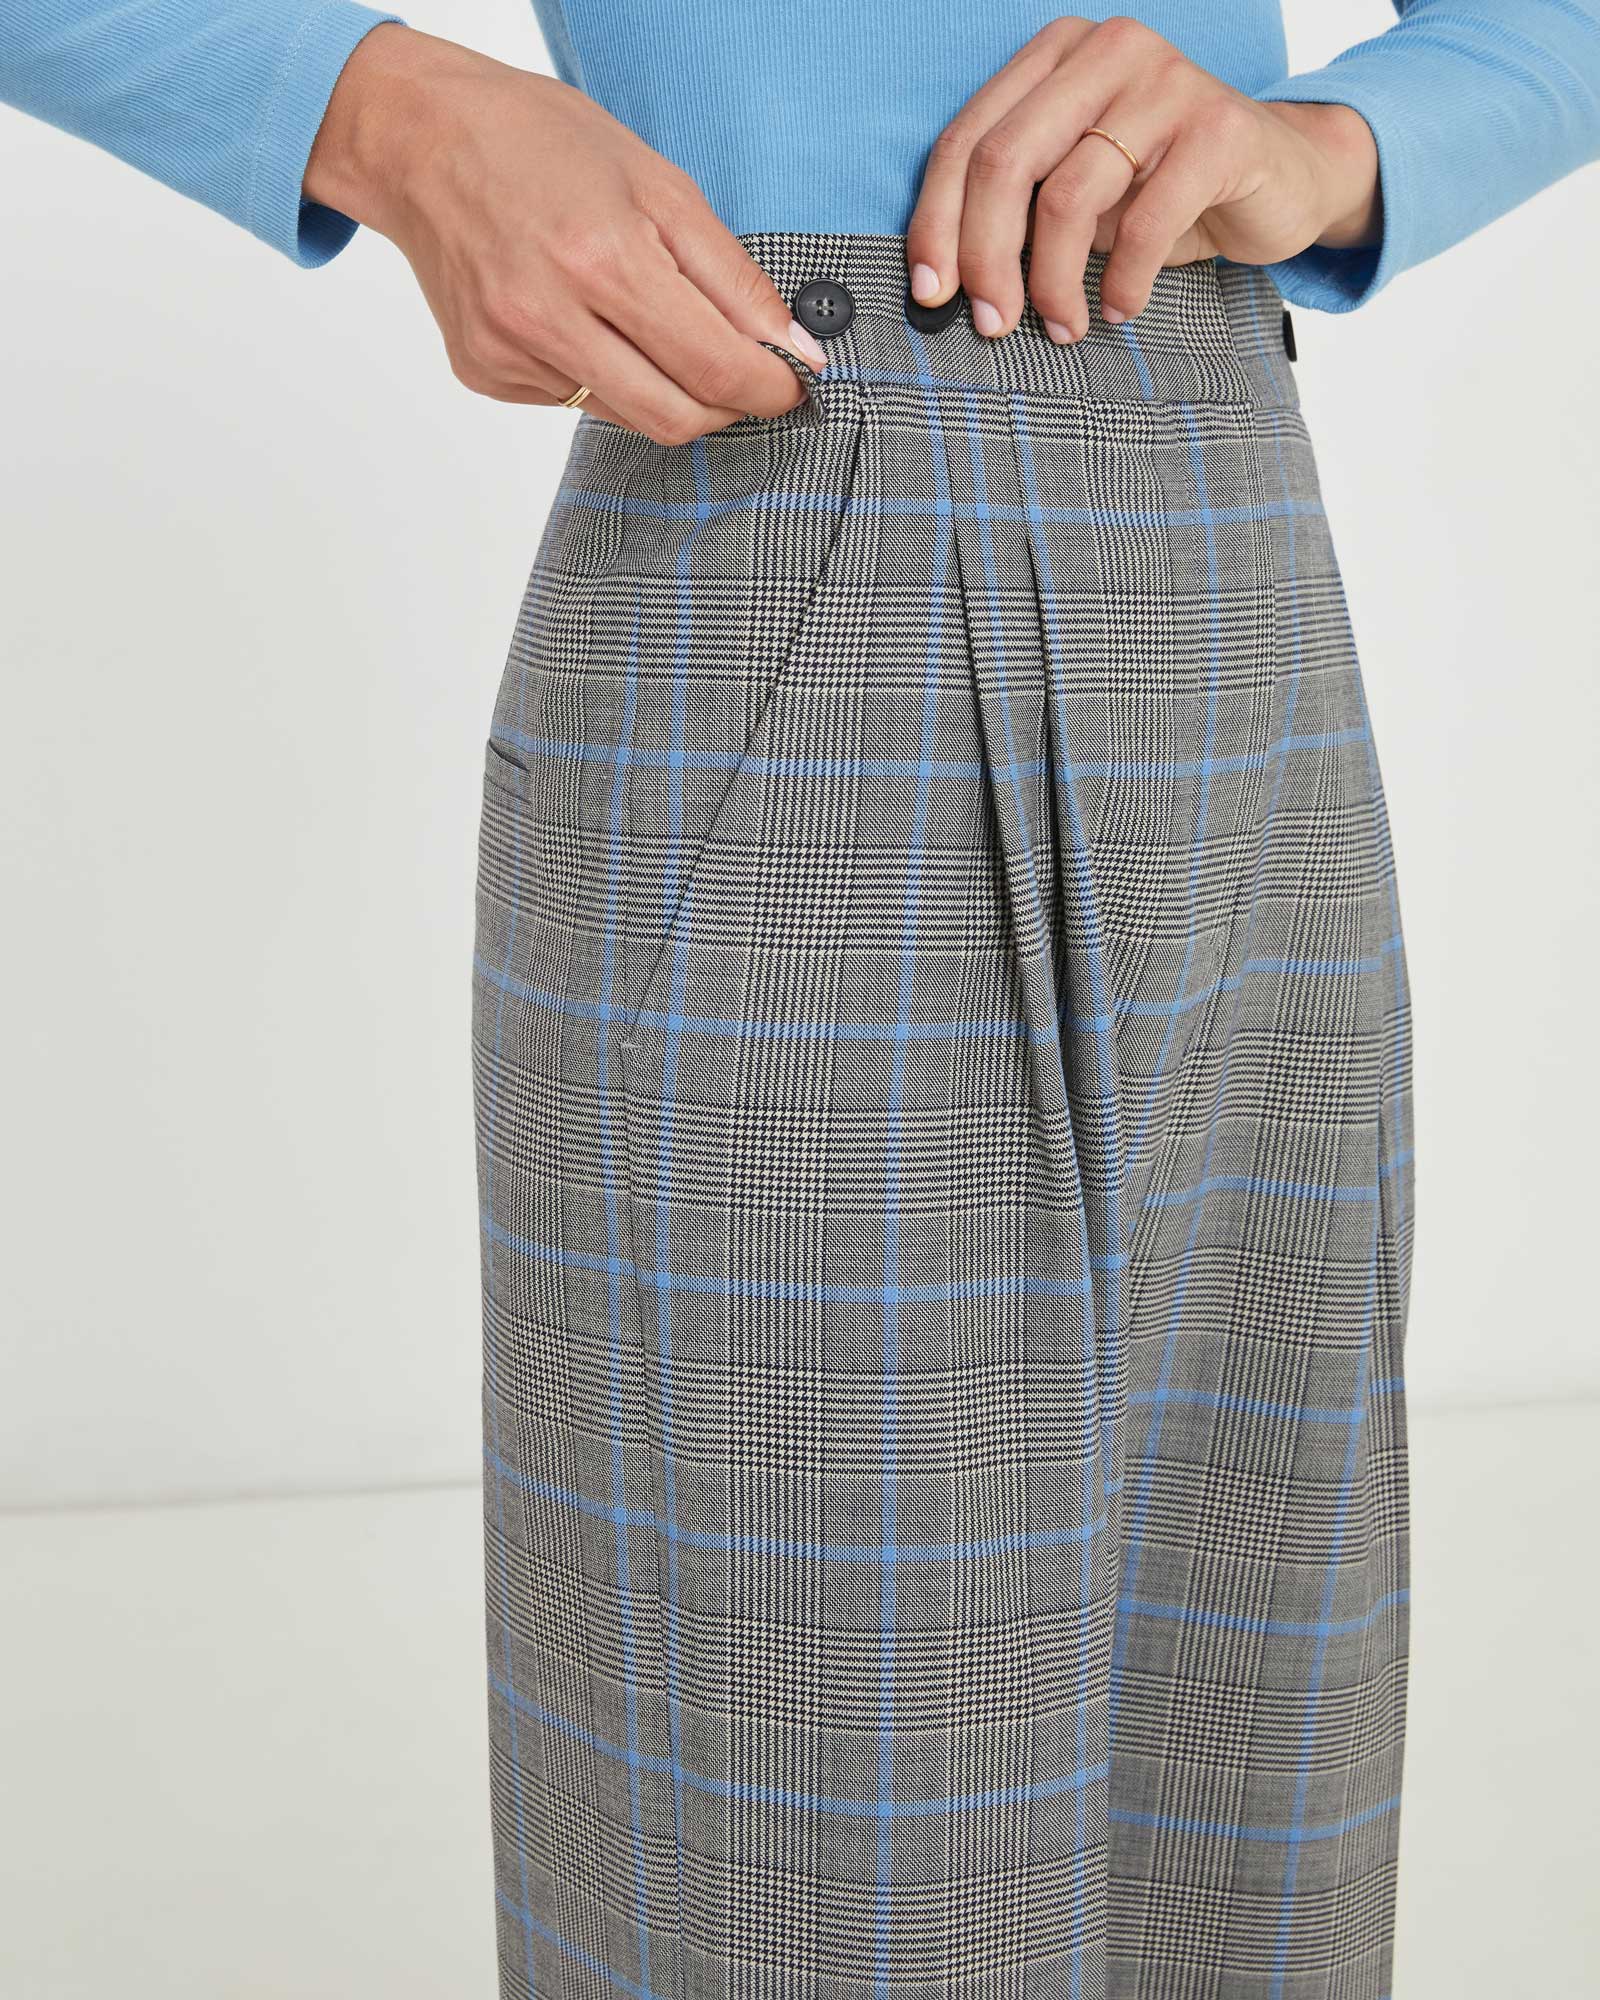 Power Hour Pleat Pant Wool Blue London Check